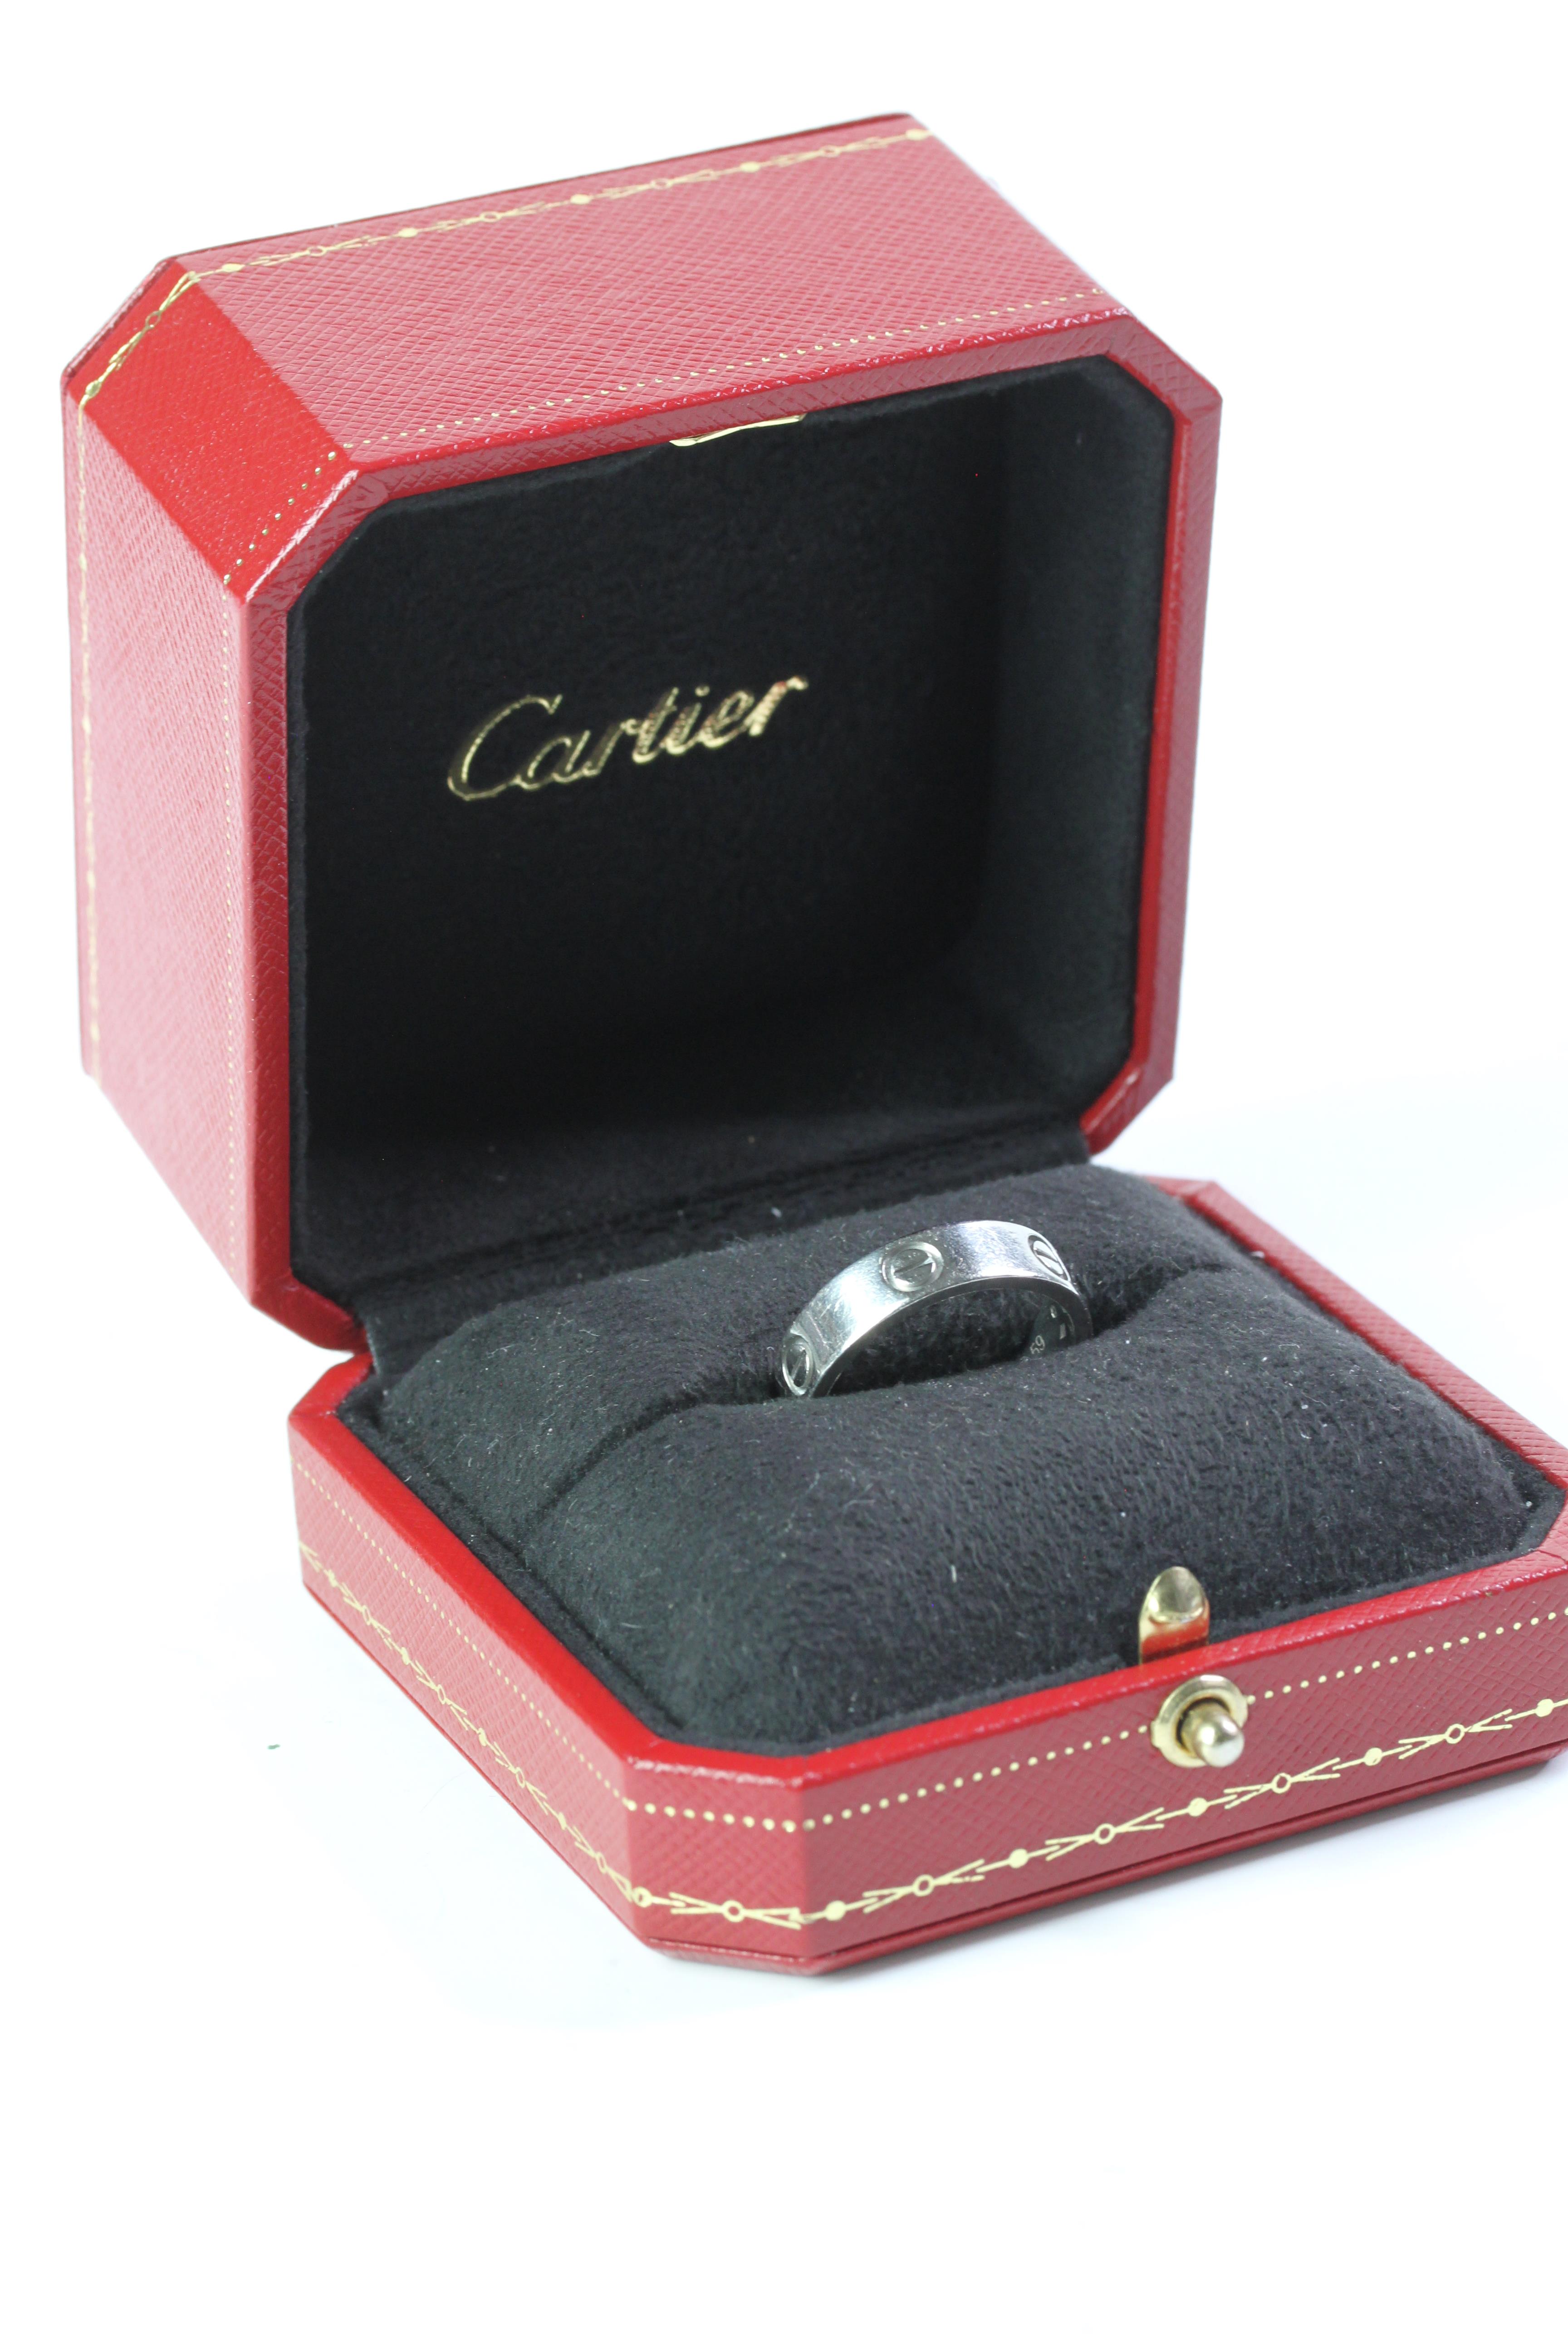 Cartier Love Ring, platinum, size S, comes with a Cartier box.